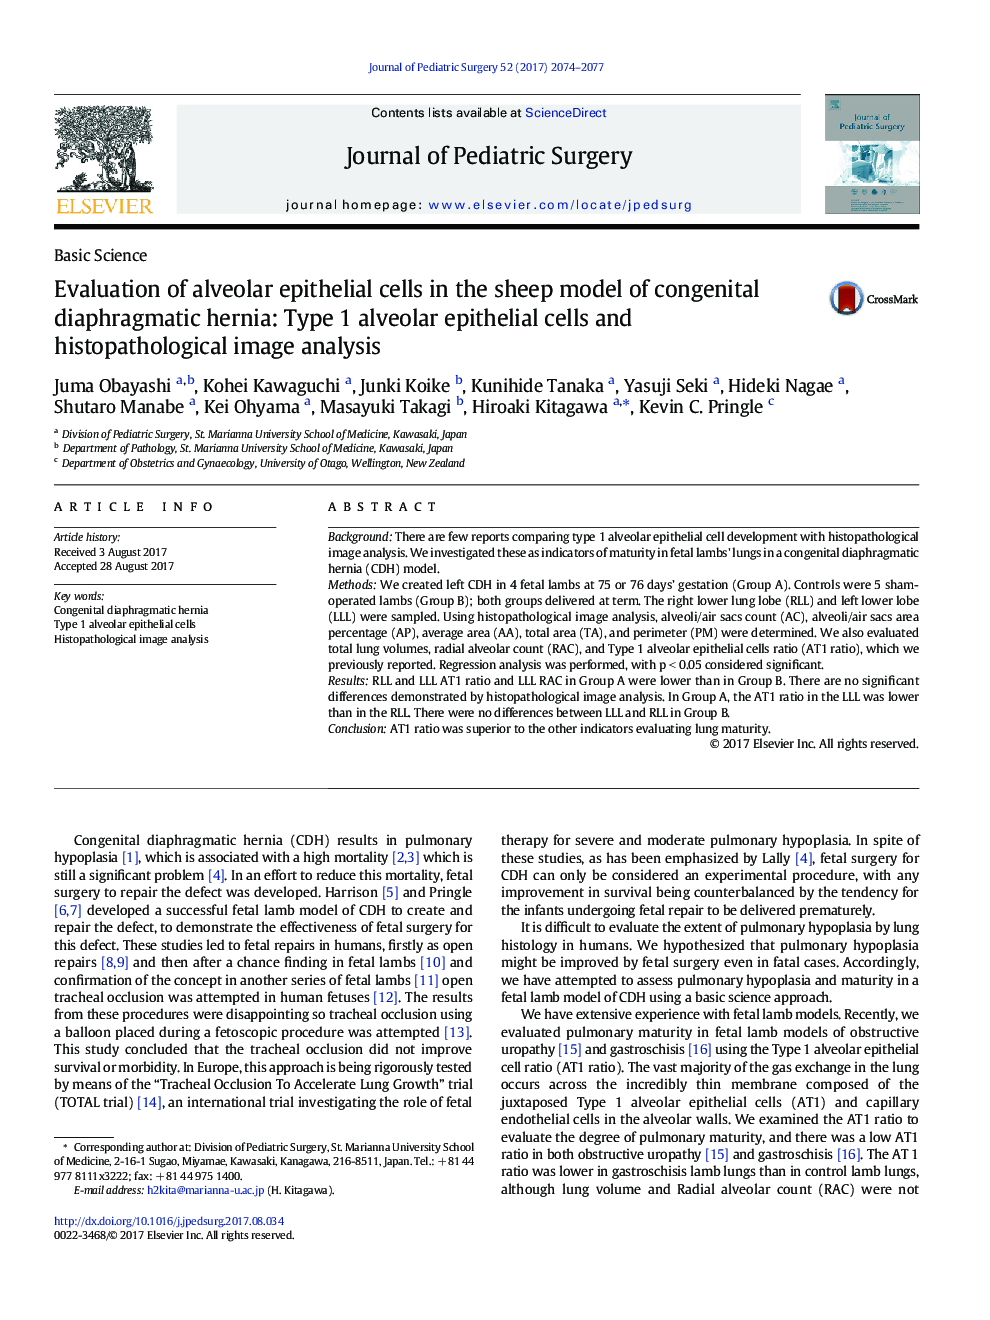 Evaluation of alveolar epithelial cells in the sheep model of congenital diaphragmatic hernia: Type 1 alveolar epithelial cells and histopathological image analysis